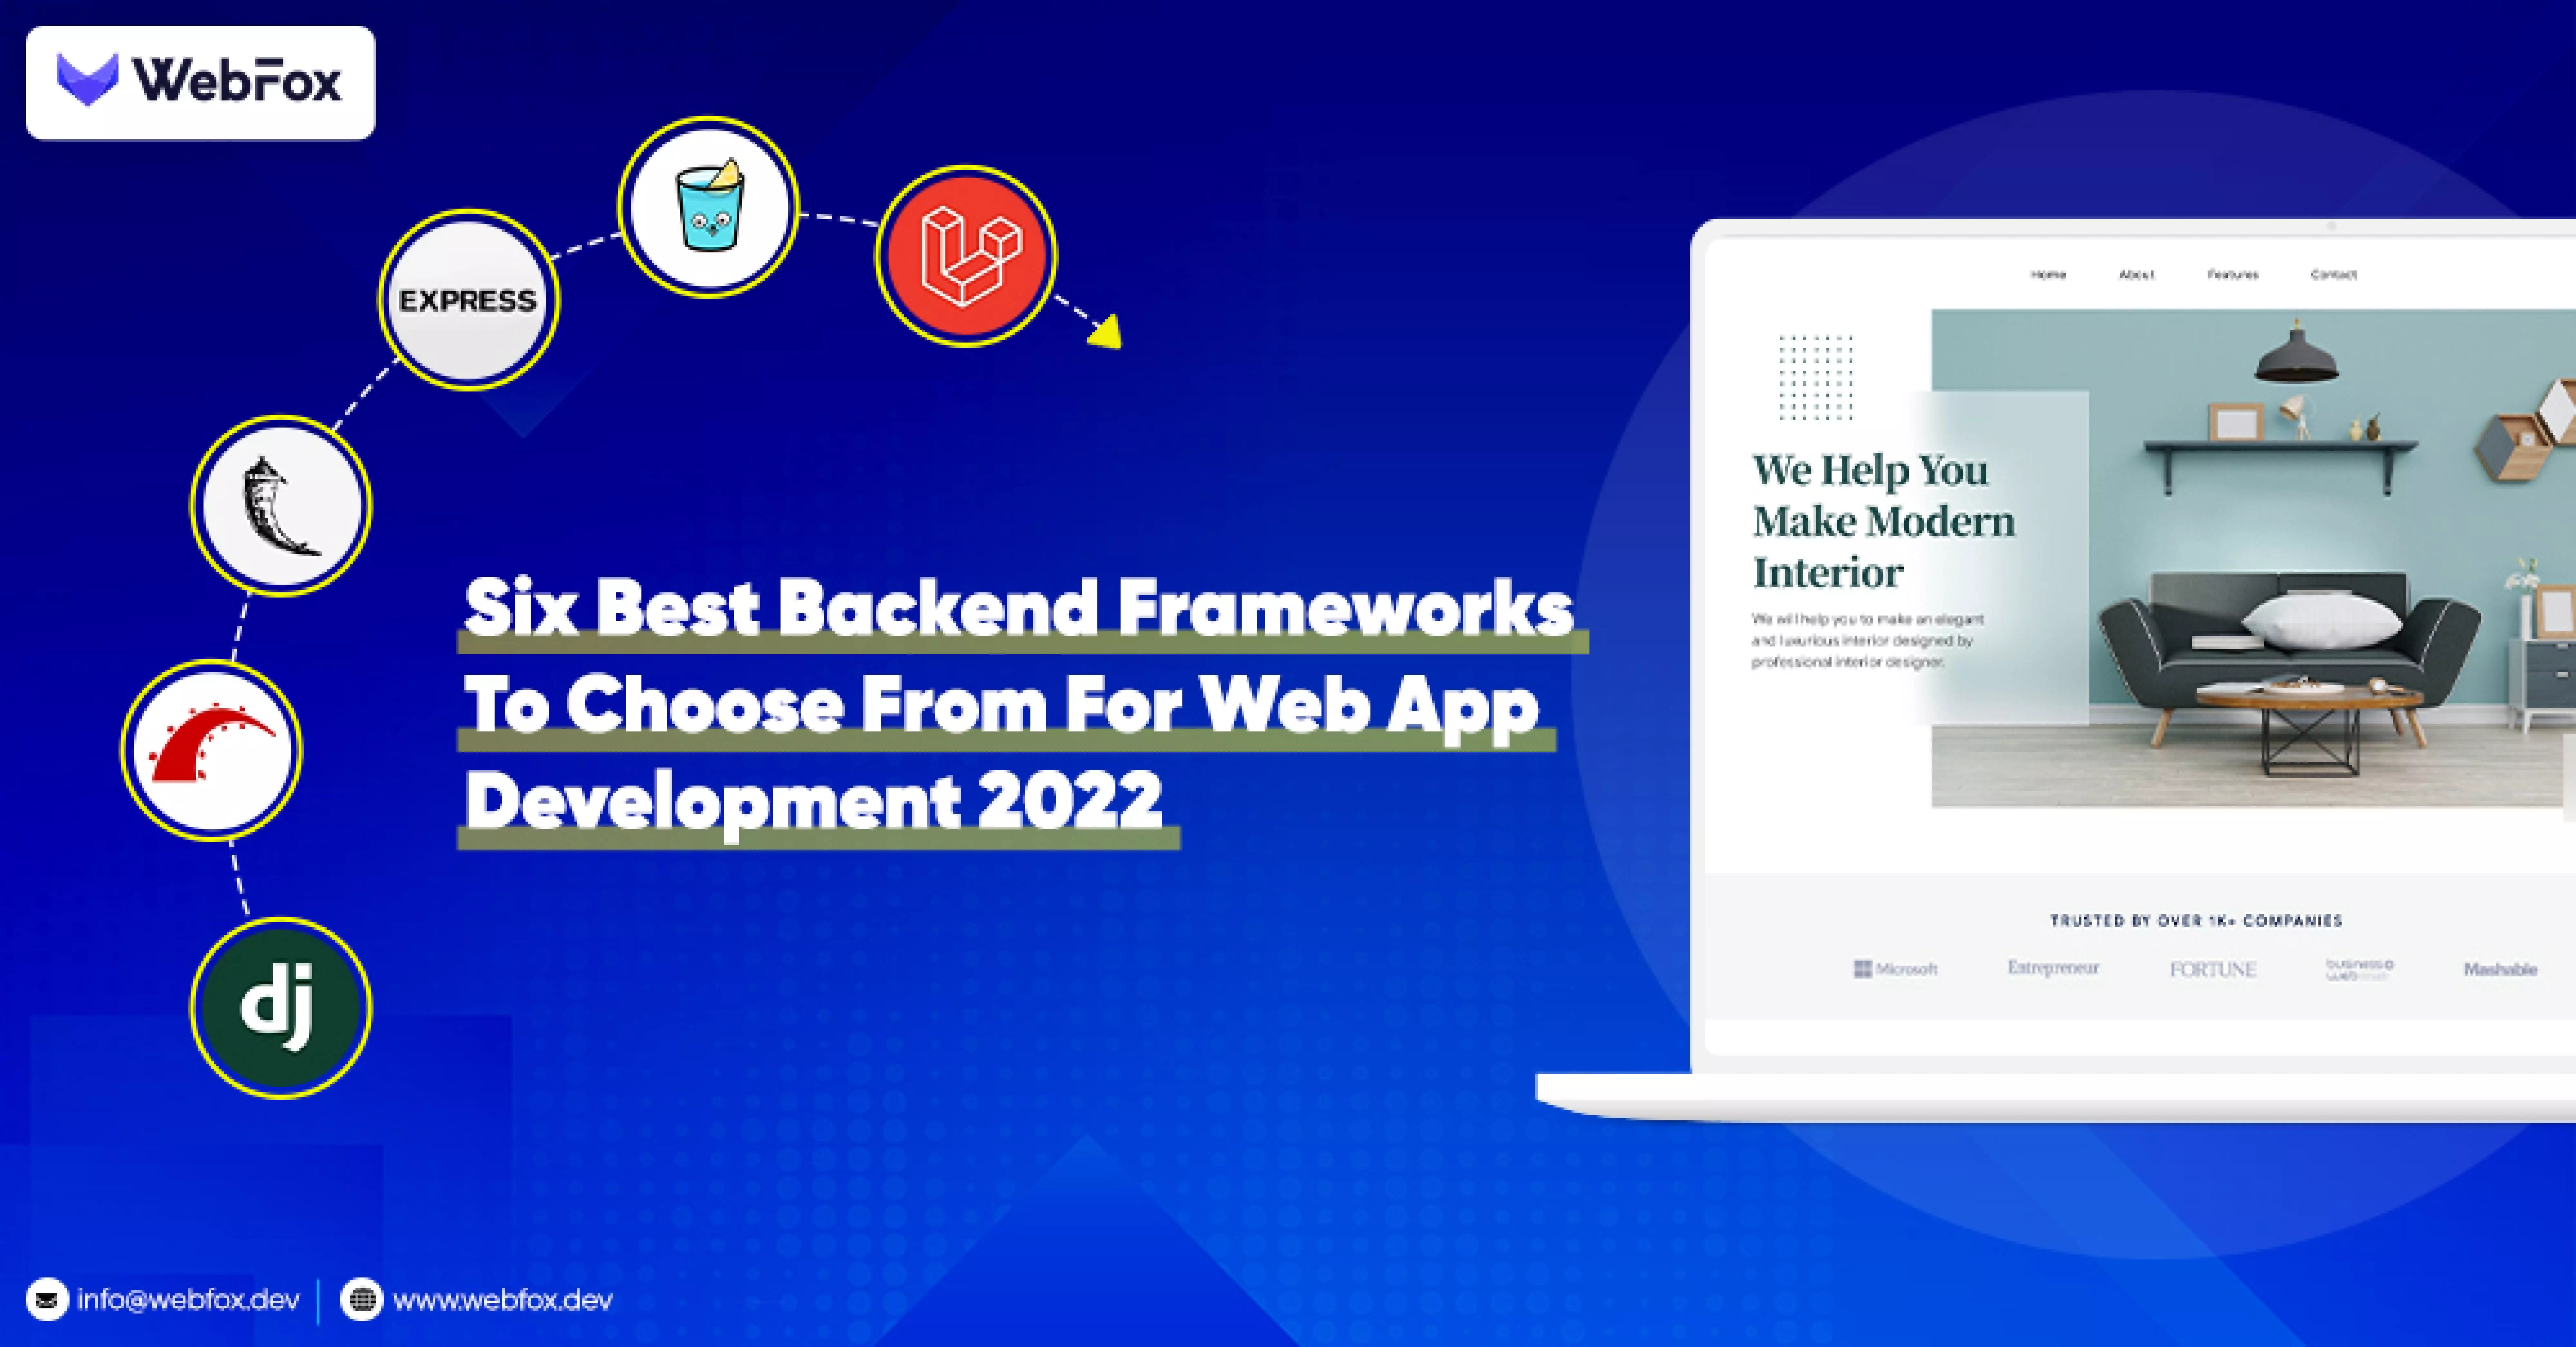 Six Best Backend Frameworks To Choose From For Web App Development 2022